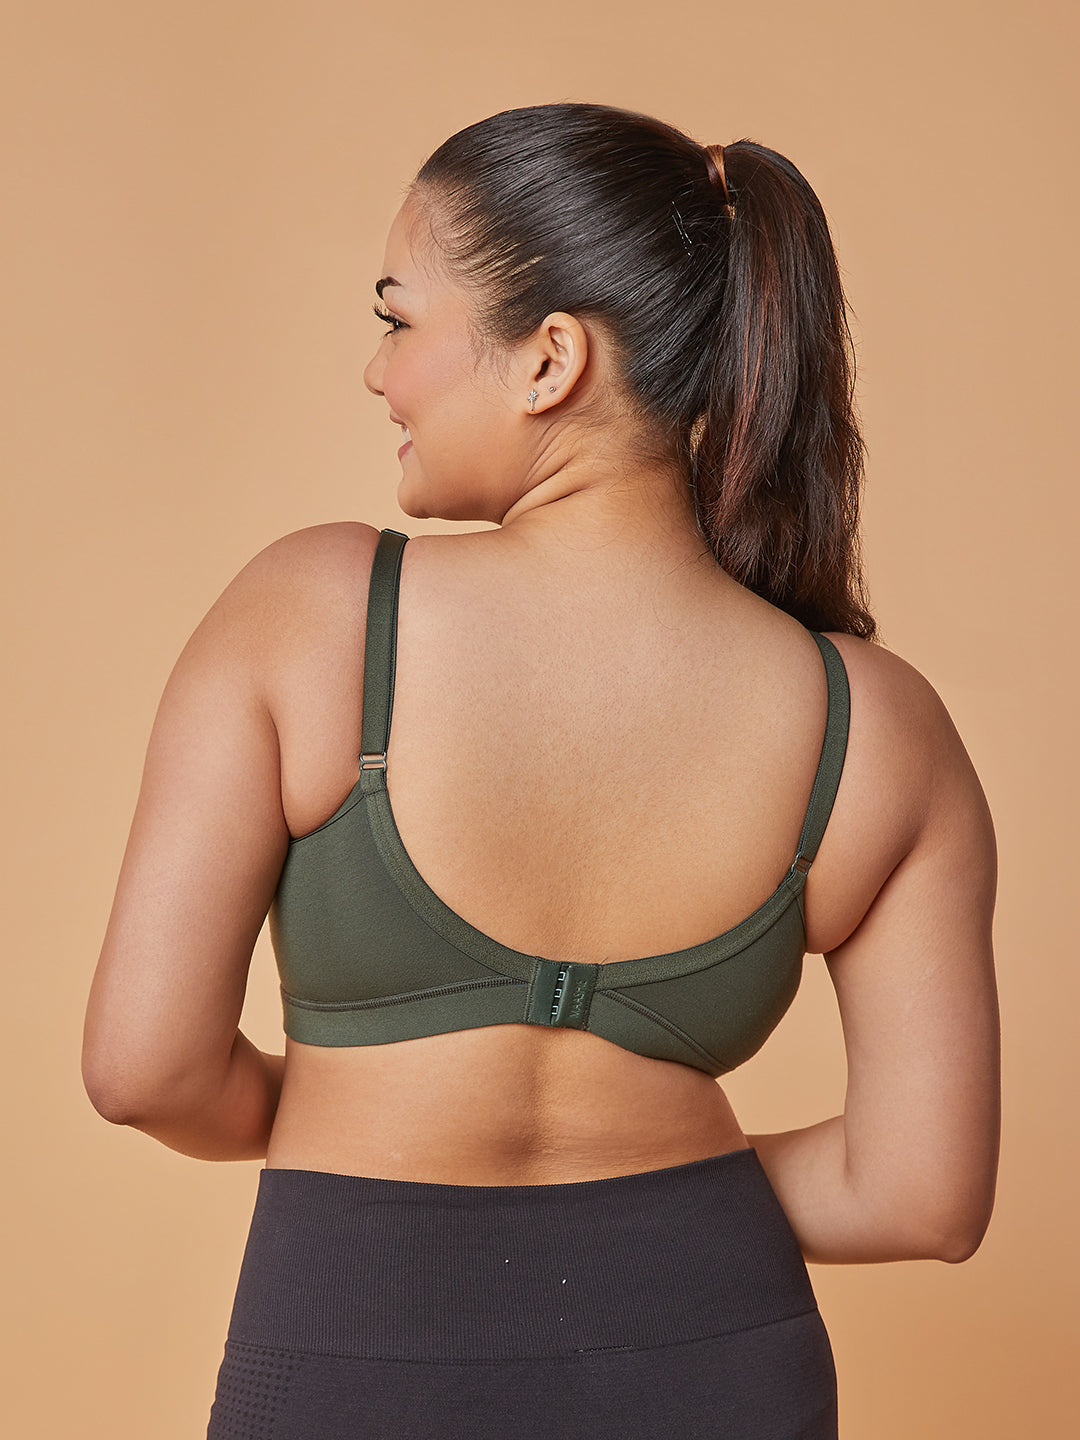 maashie M4408 Cotton Non-Padded Non-Wired Everyday Bra, Olive 32C